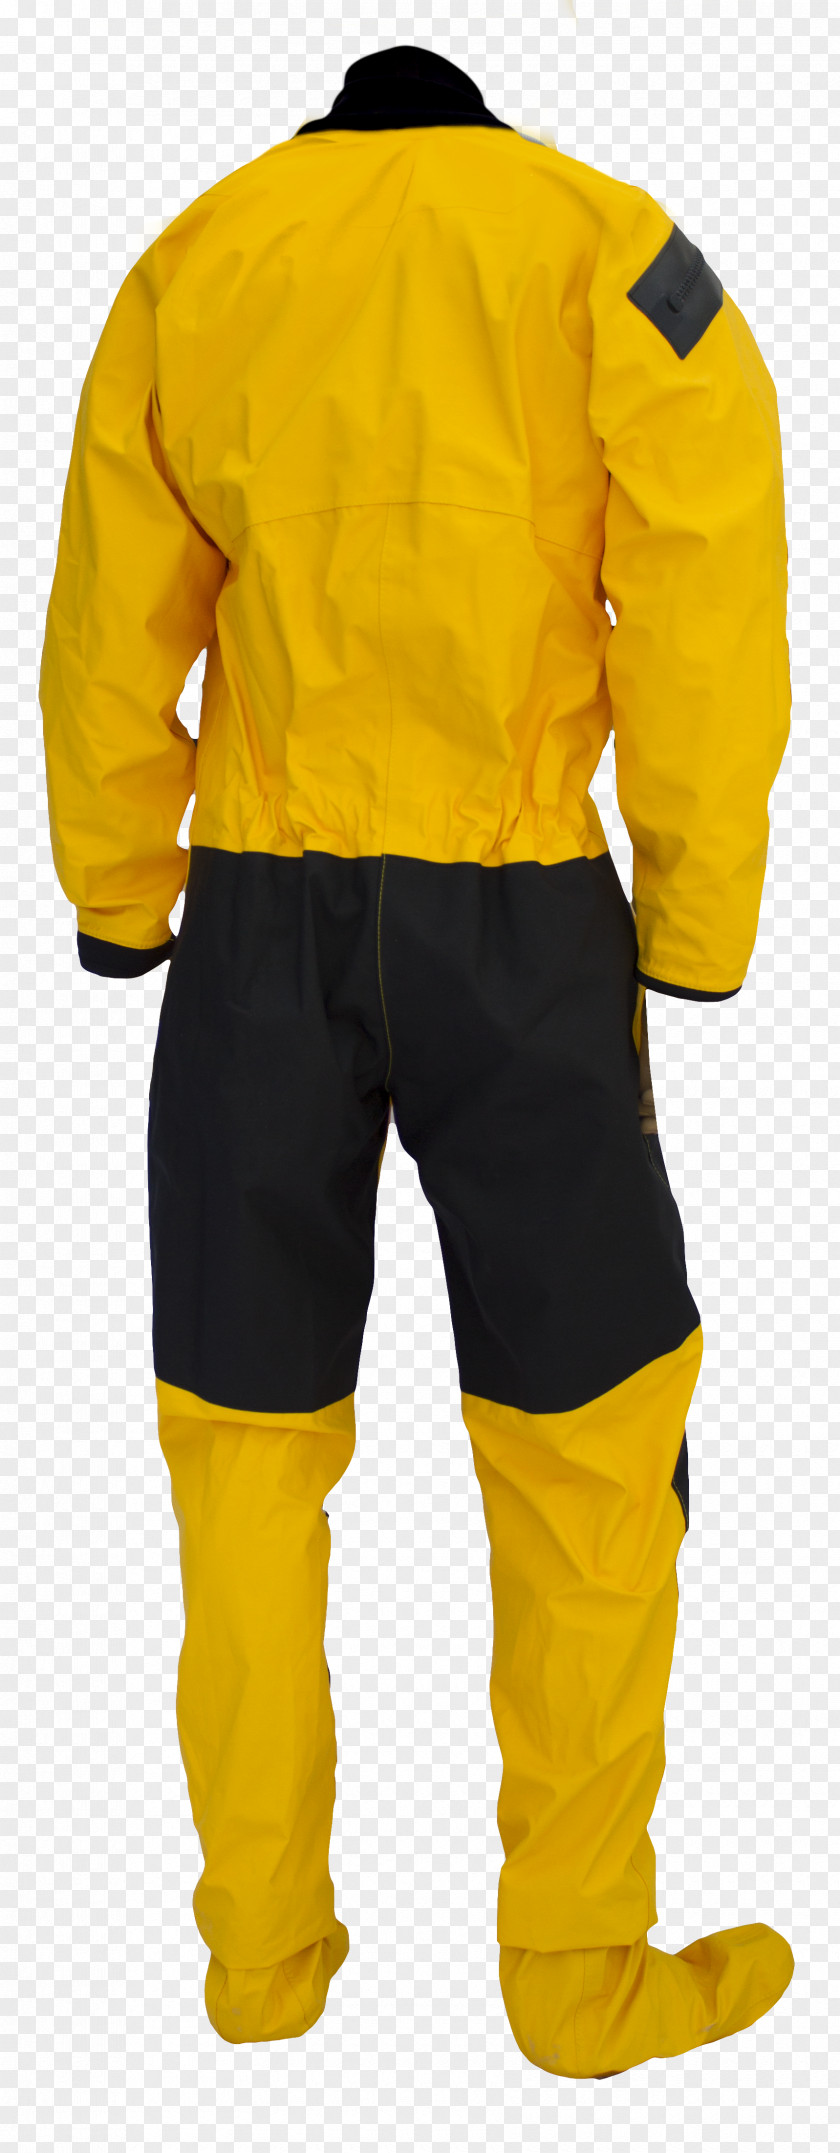 Jacket Dry Suit Tracksuit Clothing Fashion PNG